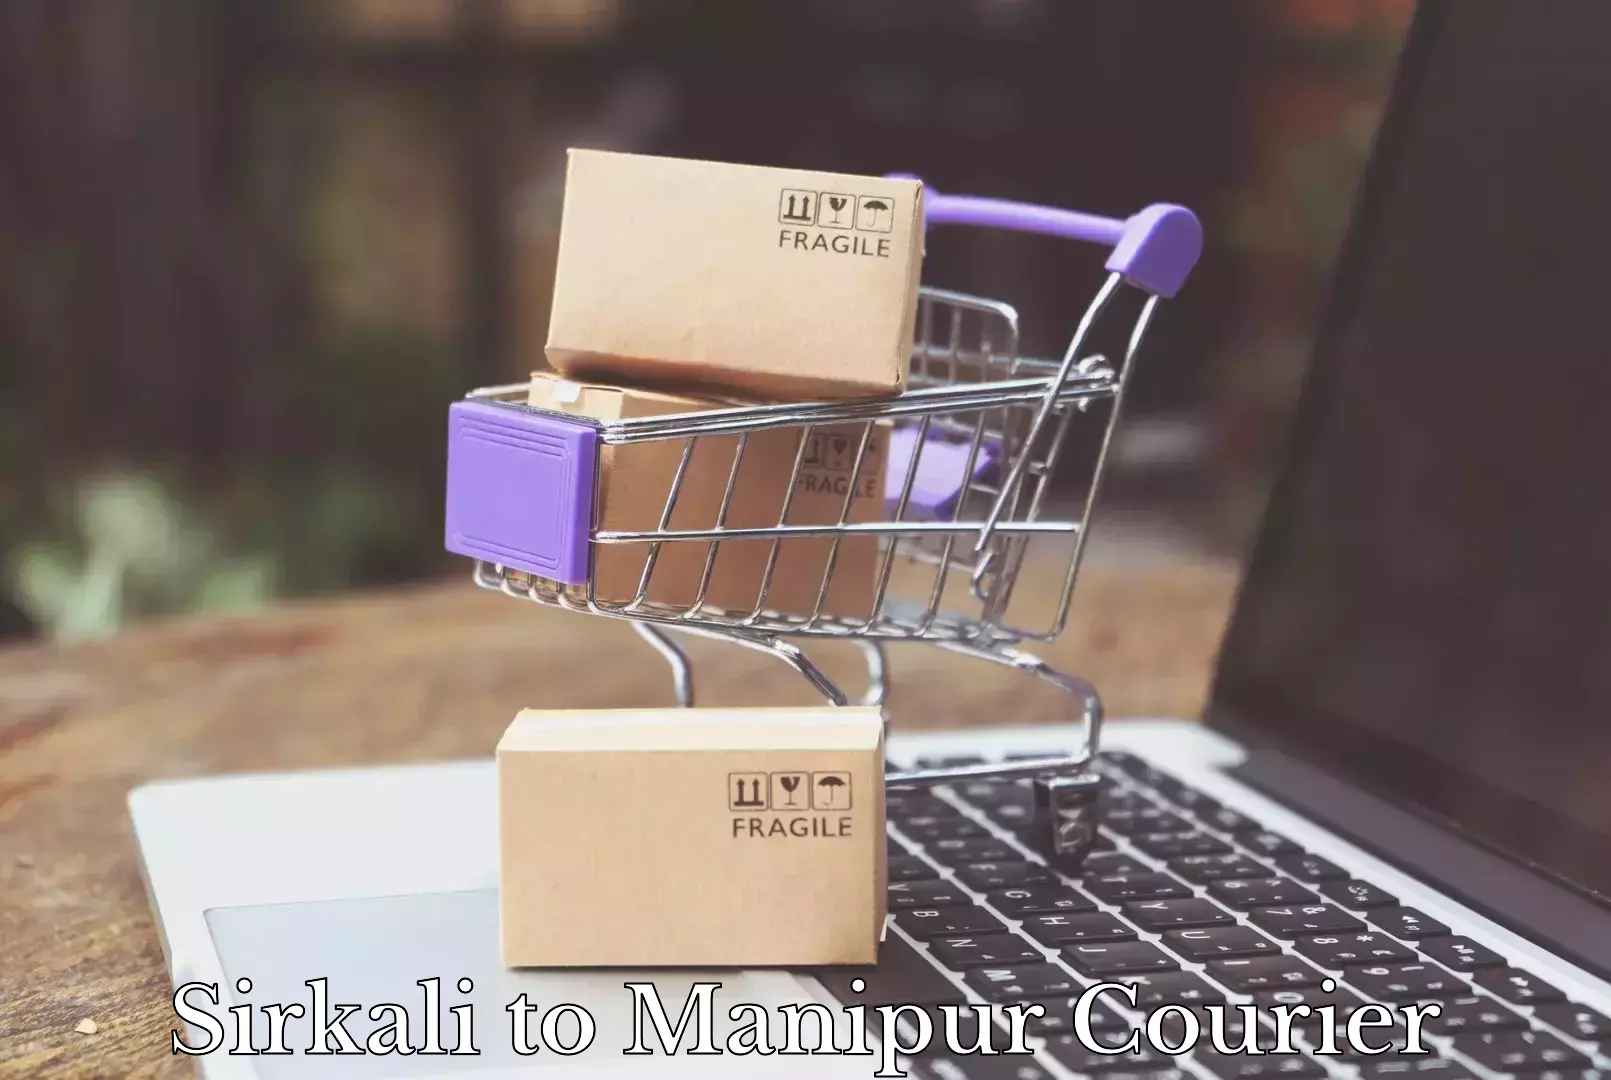 Online shipping calculator Sirkali to Manipur